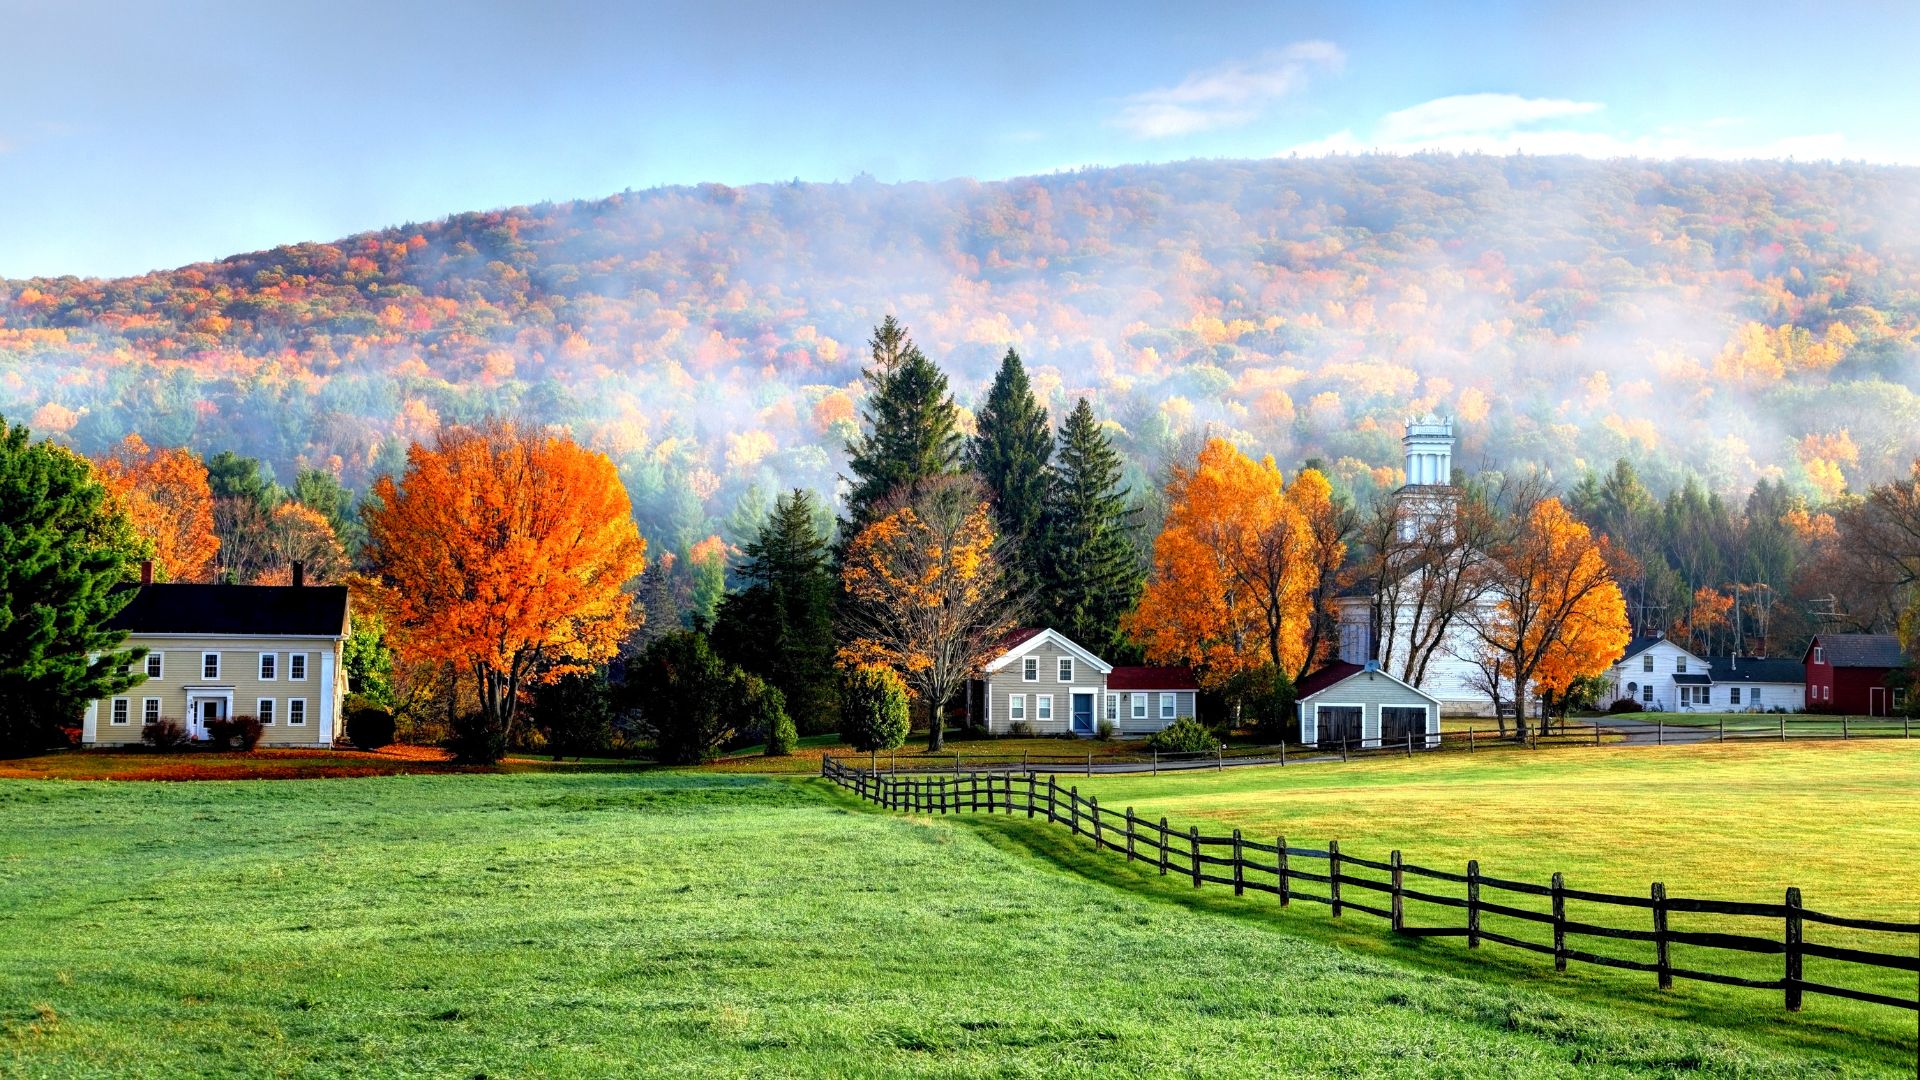 autumn mist over the village of tyringham in the berkshires ma